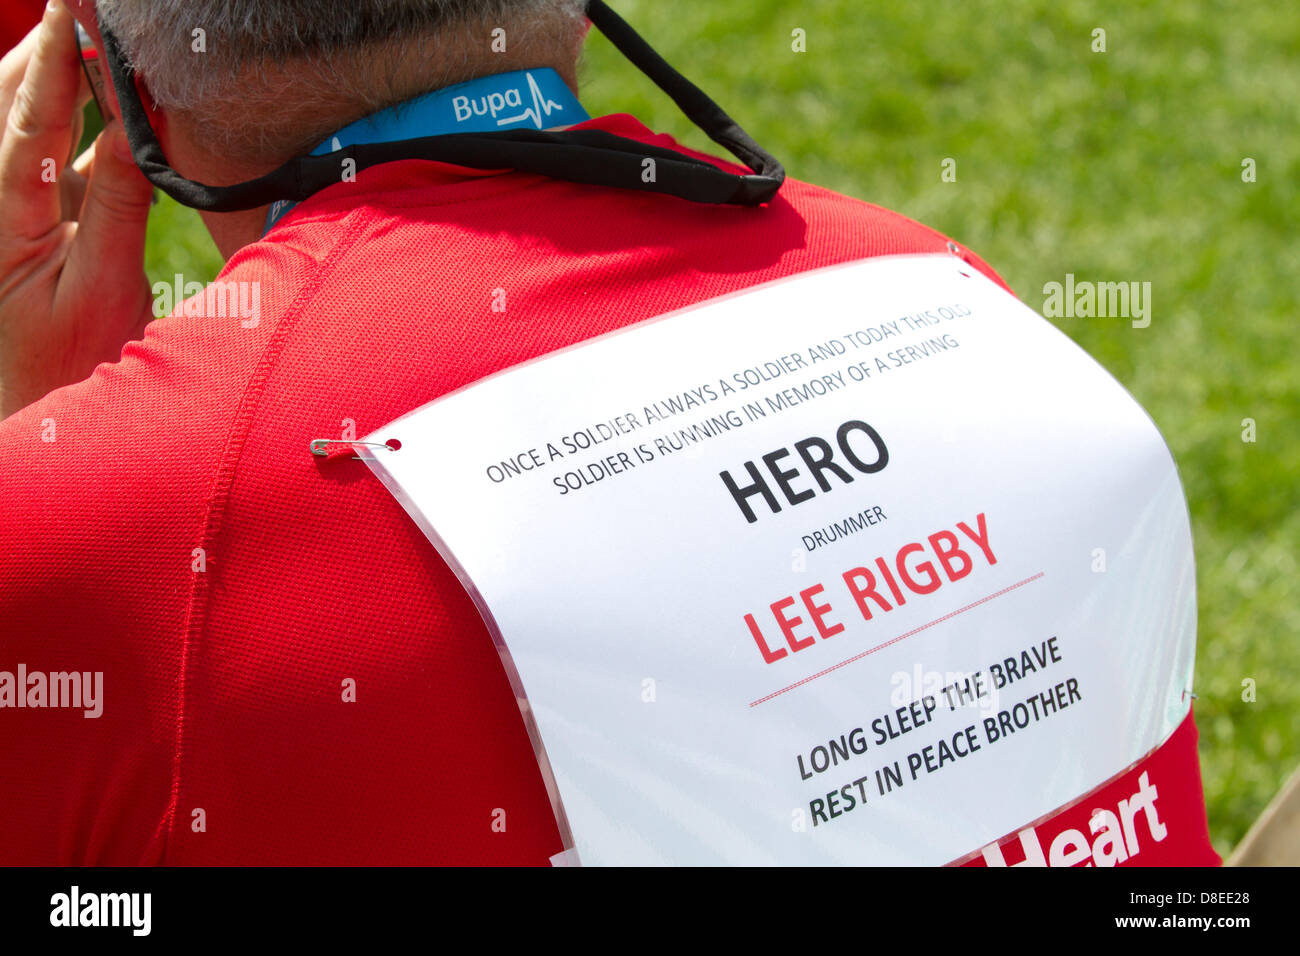 London, UK. 27th May 2013. A soldier runs in memory of drummer Lee Rigby who was murdered in Woolwich. Thousands of runners take part in the annual BUPA 10,000 road race through the streets of London with many runners running for various charities. Credit: amer ghazzal/Alamy Live News Stock Photo